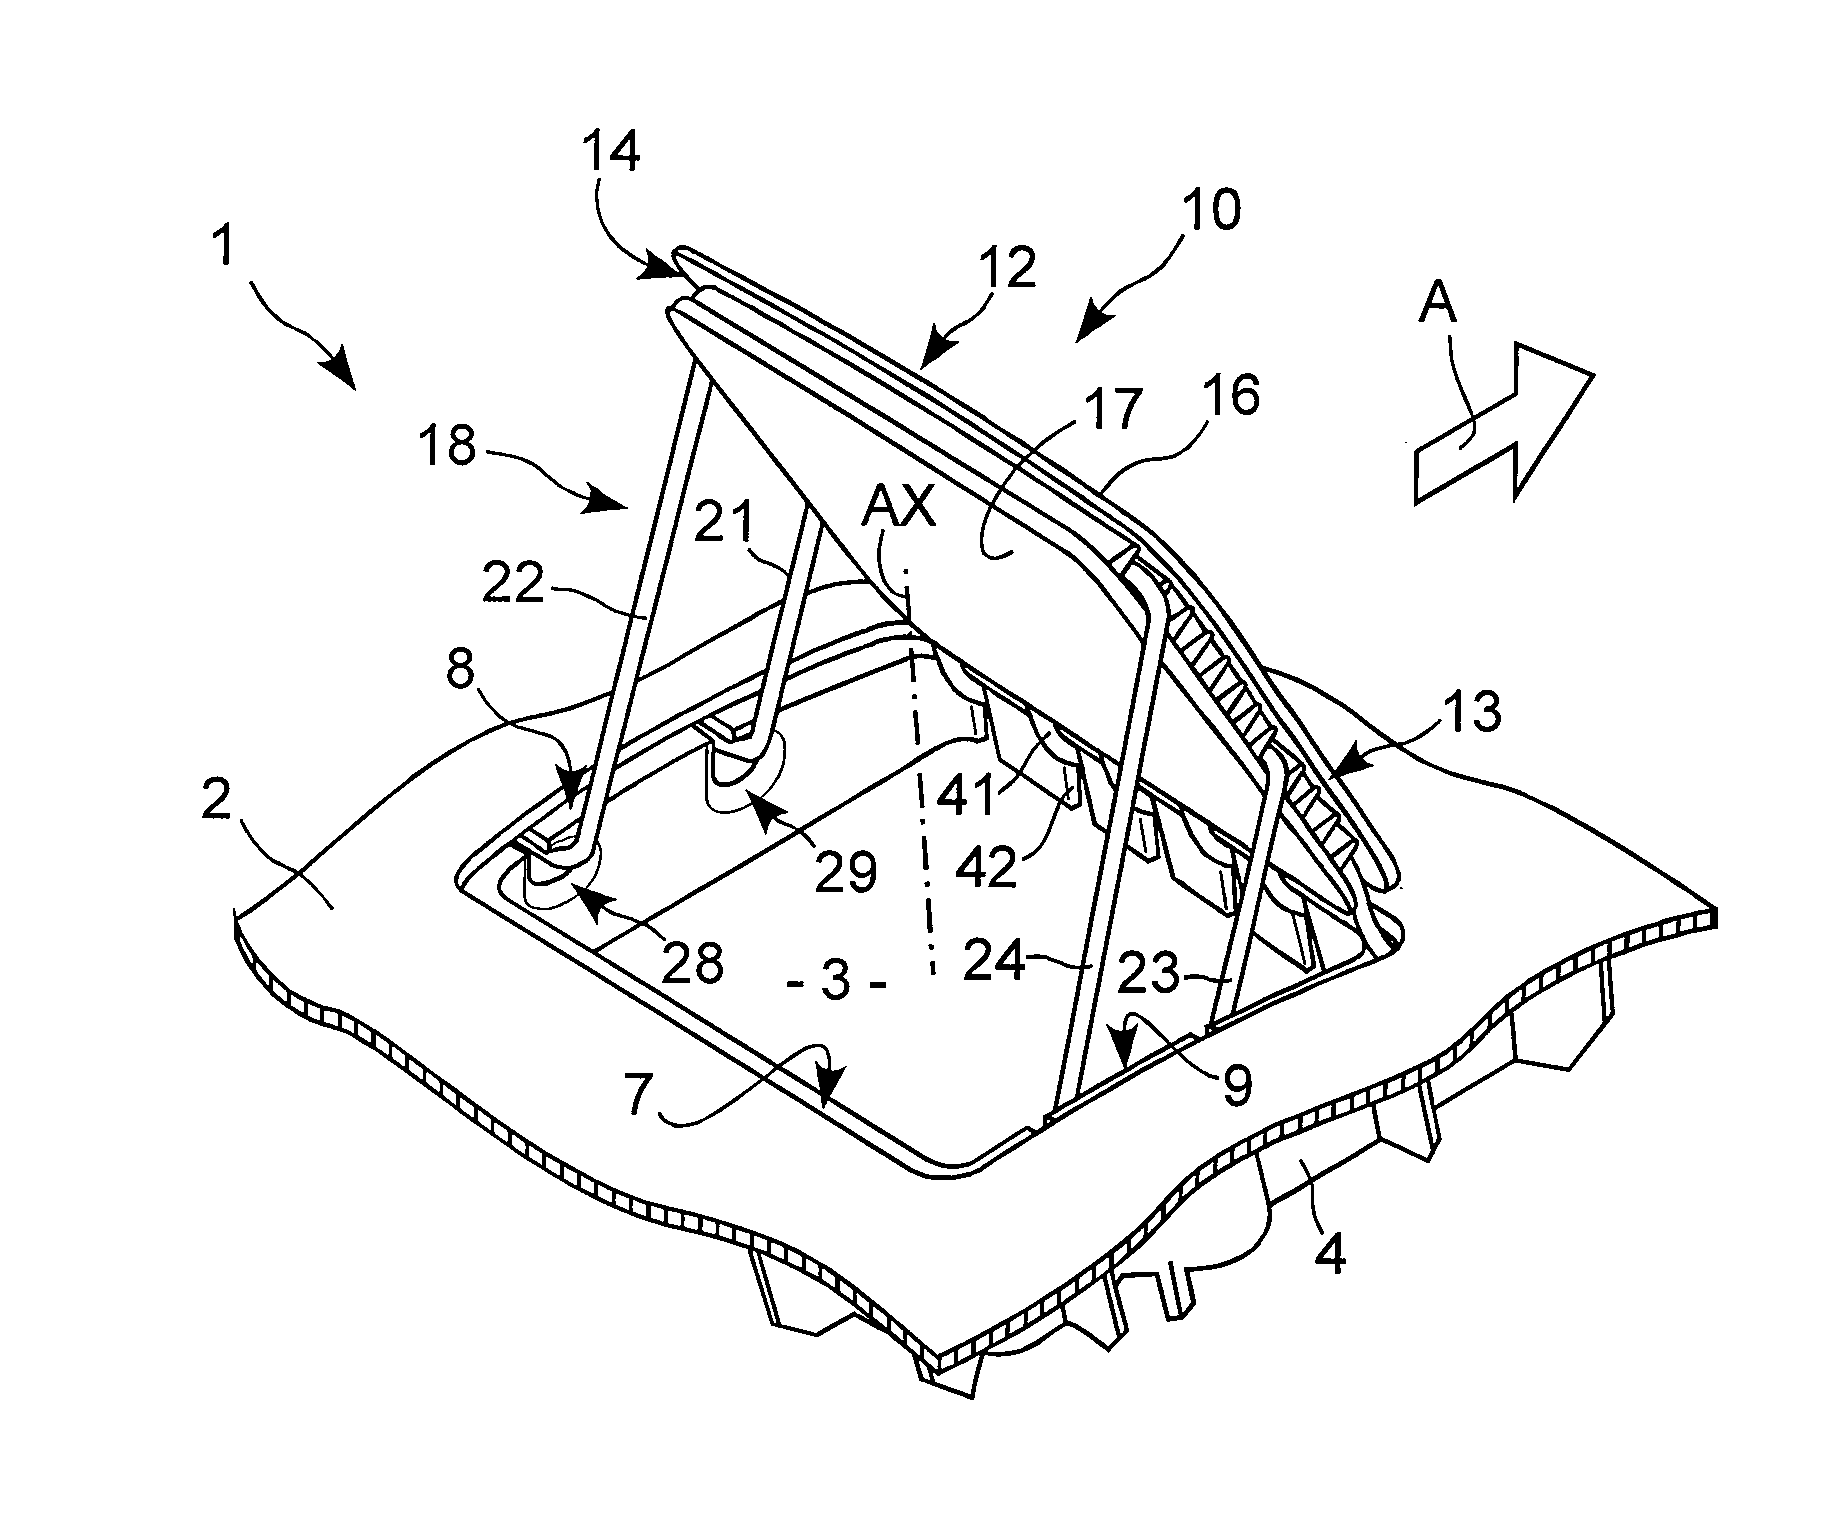 Inflatable airbag arrangement comprising a flap connected to an instrument panel by a linear link having four parallel retaining portions